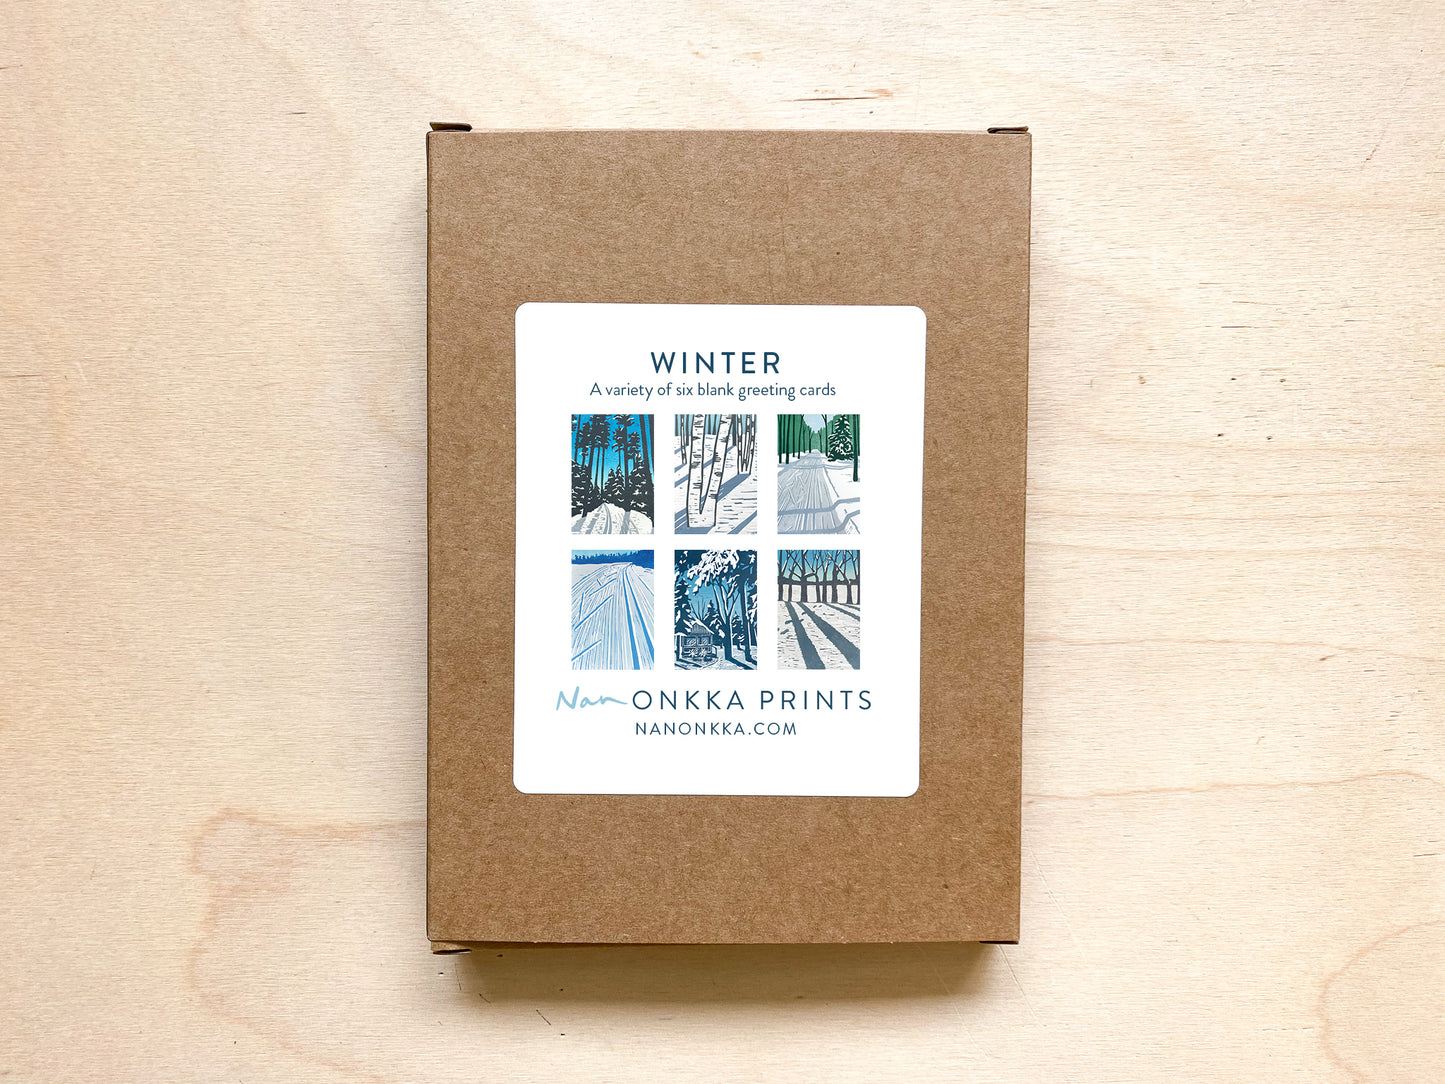 Boxed Set of Winter Greeting Cards (6 cards)